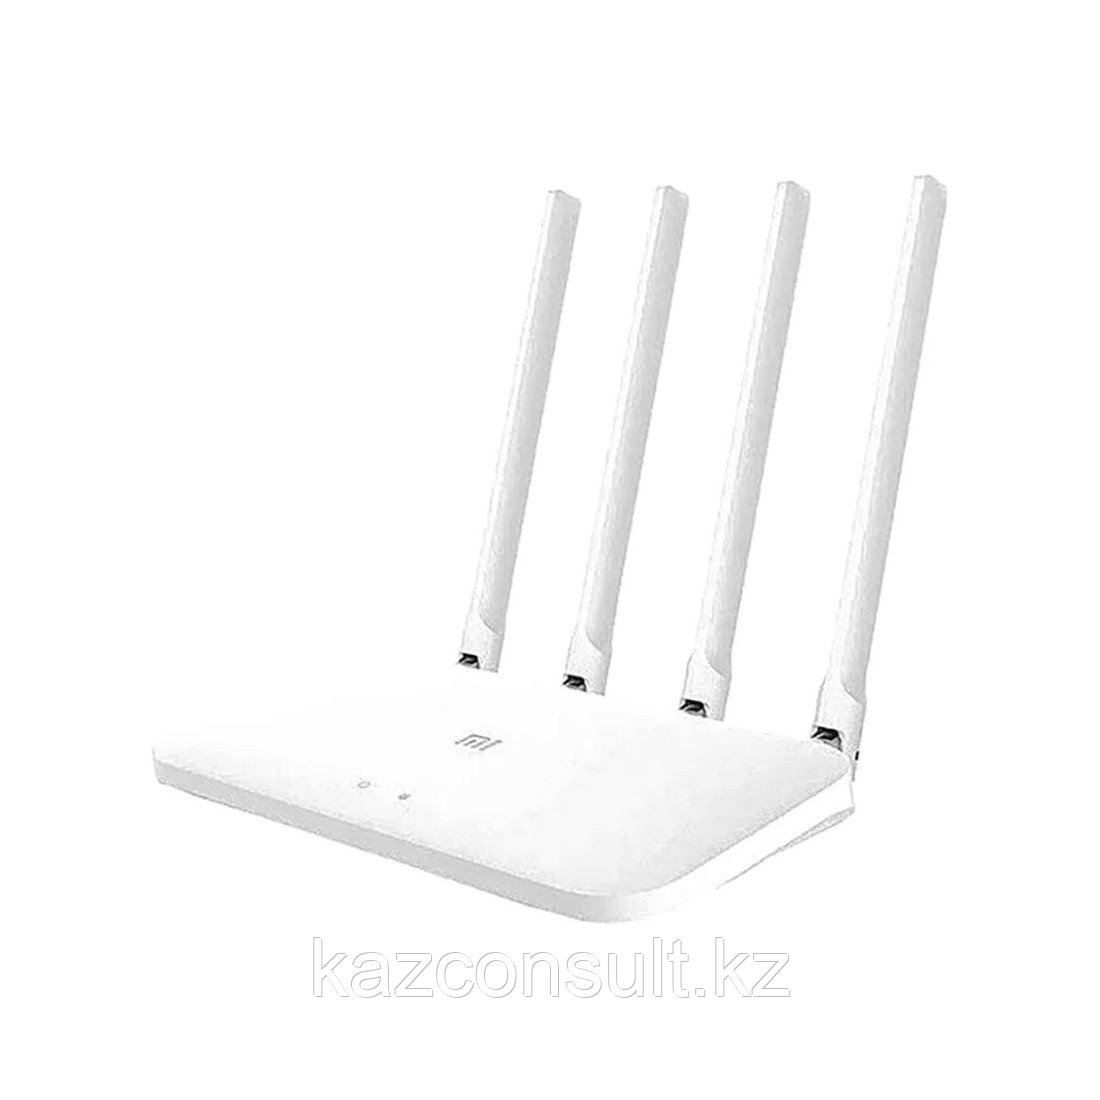 Маршрутизатор Xiaomi Router AC1200 - фото 1 - id-p107603078